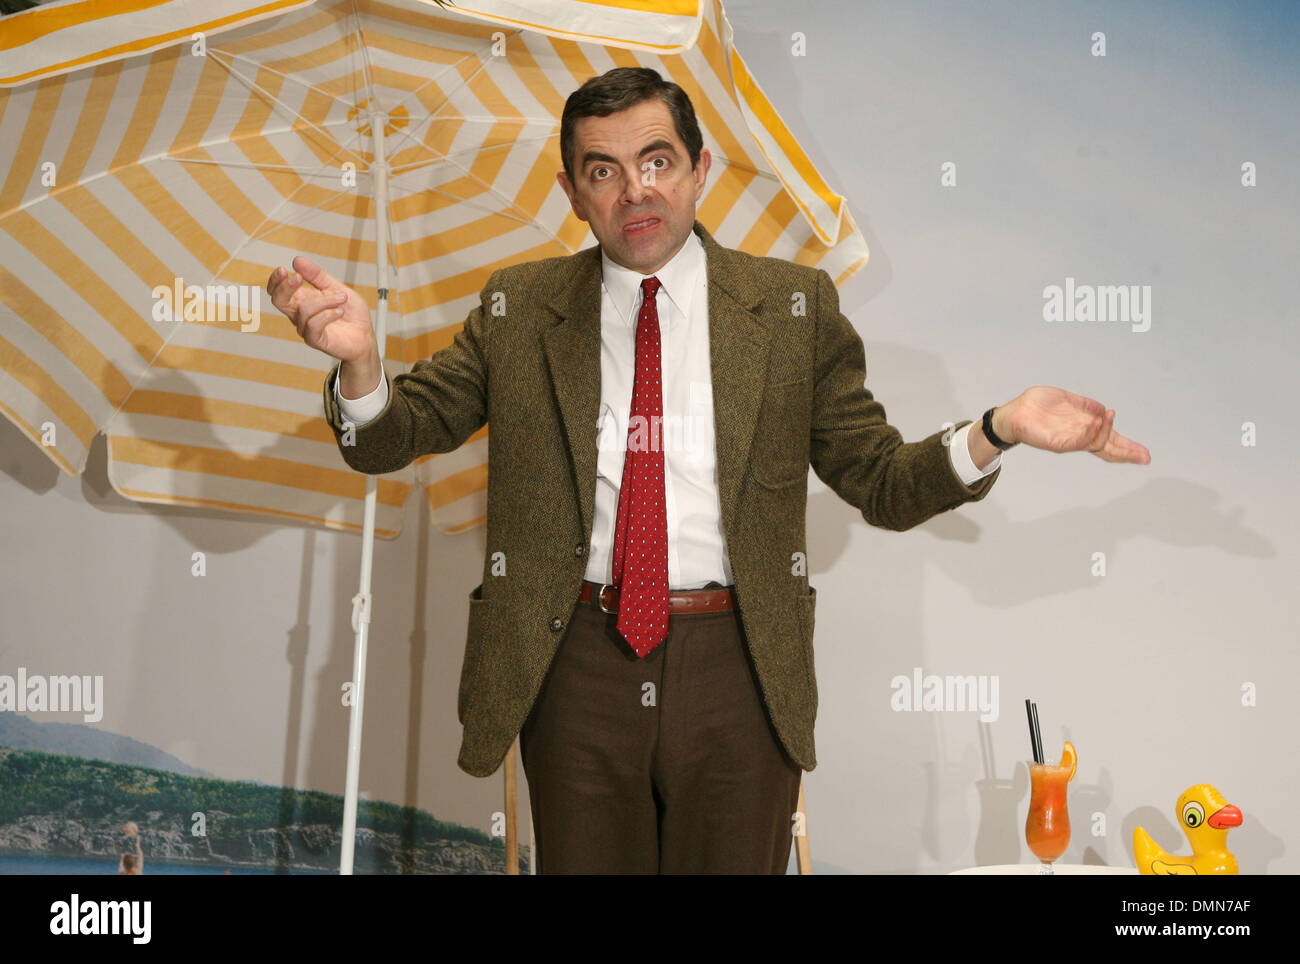 Rowan Atkinson at the photocall of his new Mr. Bean film 'Mr. Bean's Holiday' in Berlin. Stock Photo